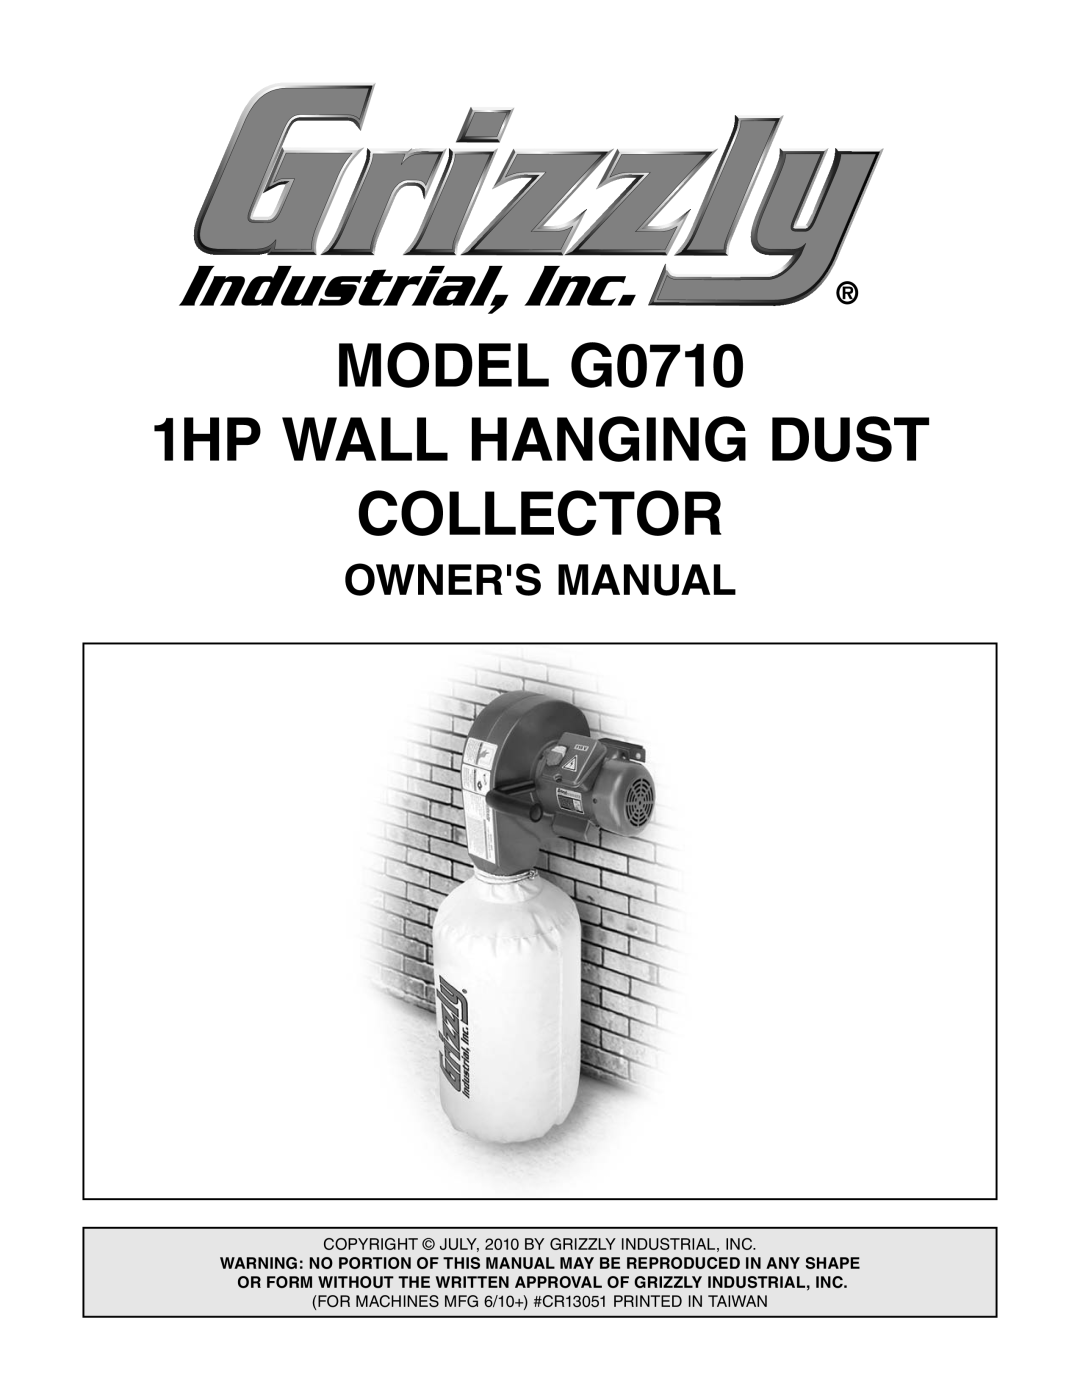 Grizzly owner manual OWNERS Manual, MODEL G0710 1HP WALL HANGING DUST COLLECTOR 